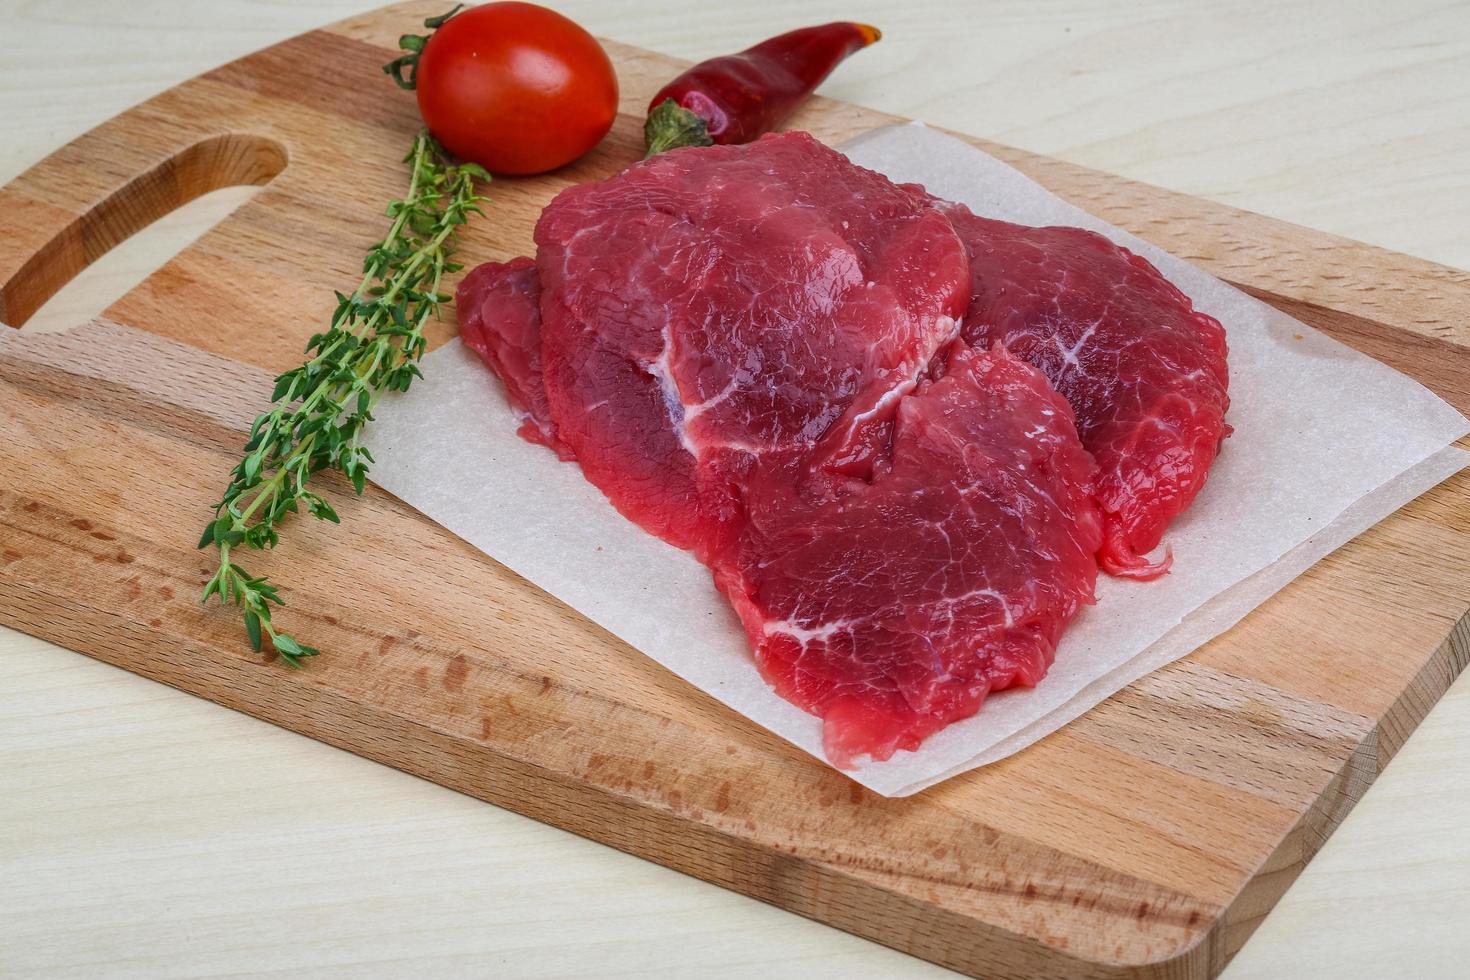 Raw beef on wooden board and wooden background photo